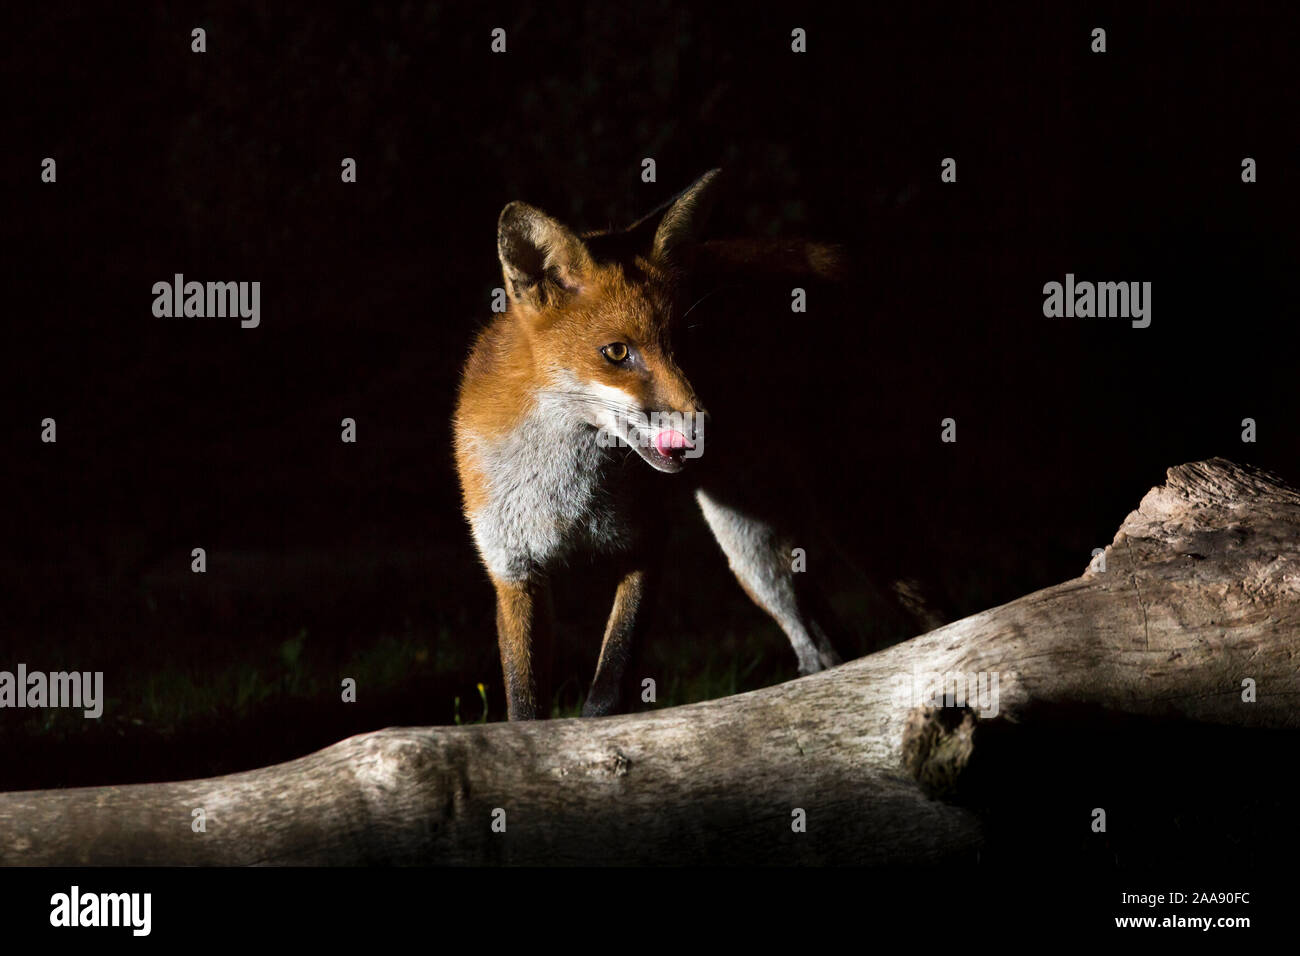 Wild, hungry, urban red fox (Vulpes vulpes) licking his lips, isolated in the dark, scavenging in UK garden at night. Stock Photo